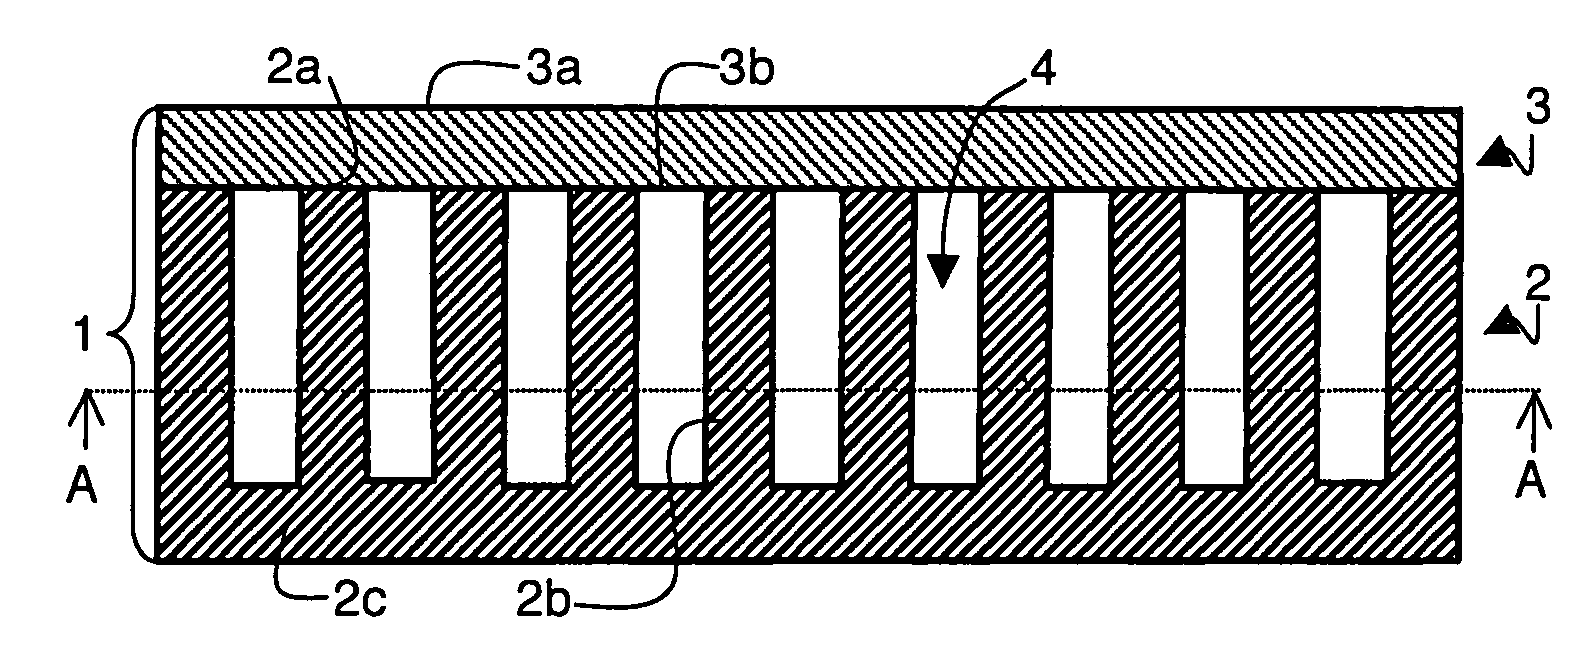 Lithium storage battery comprising a current-electrode collector assembly with expansion cavities and method for producing same